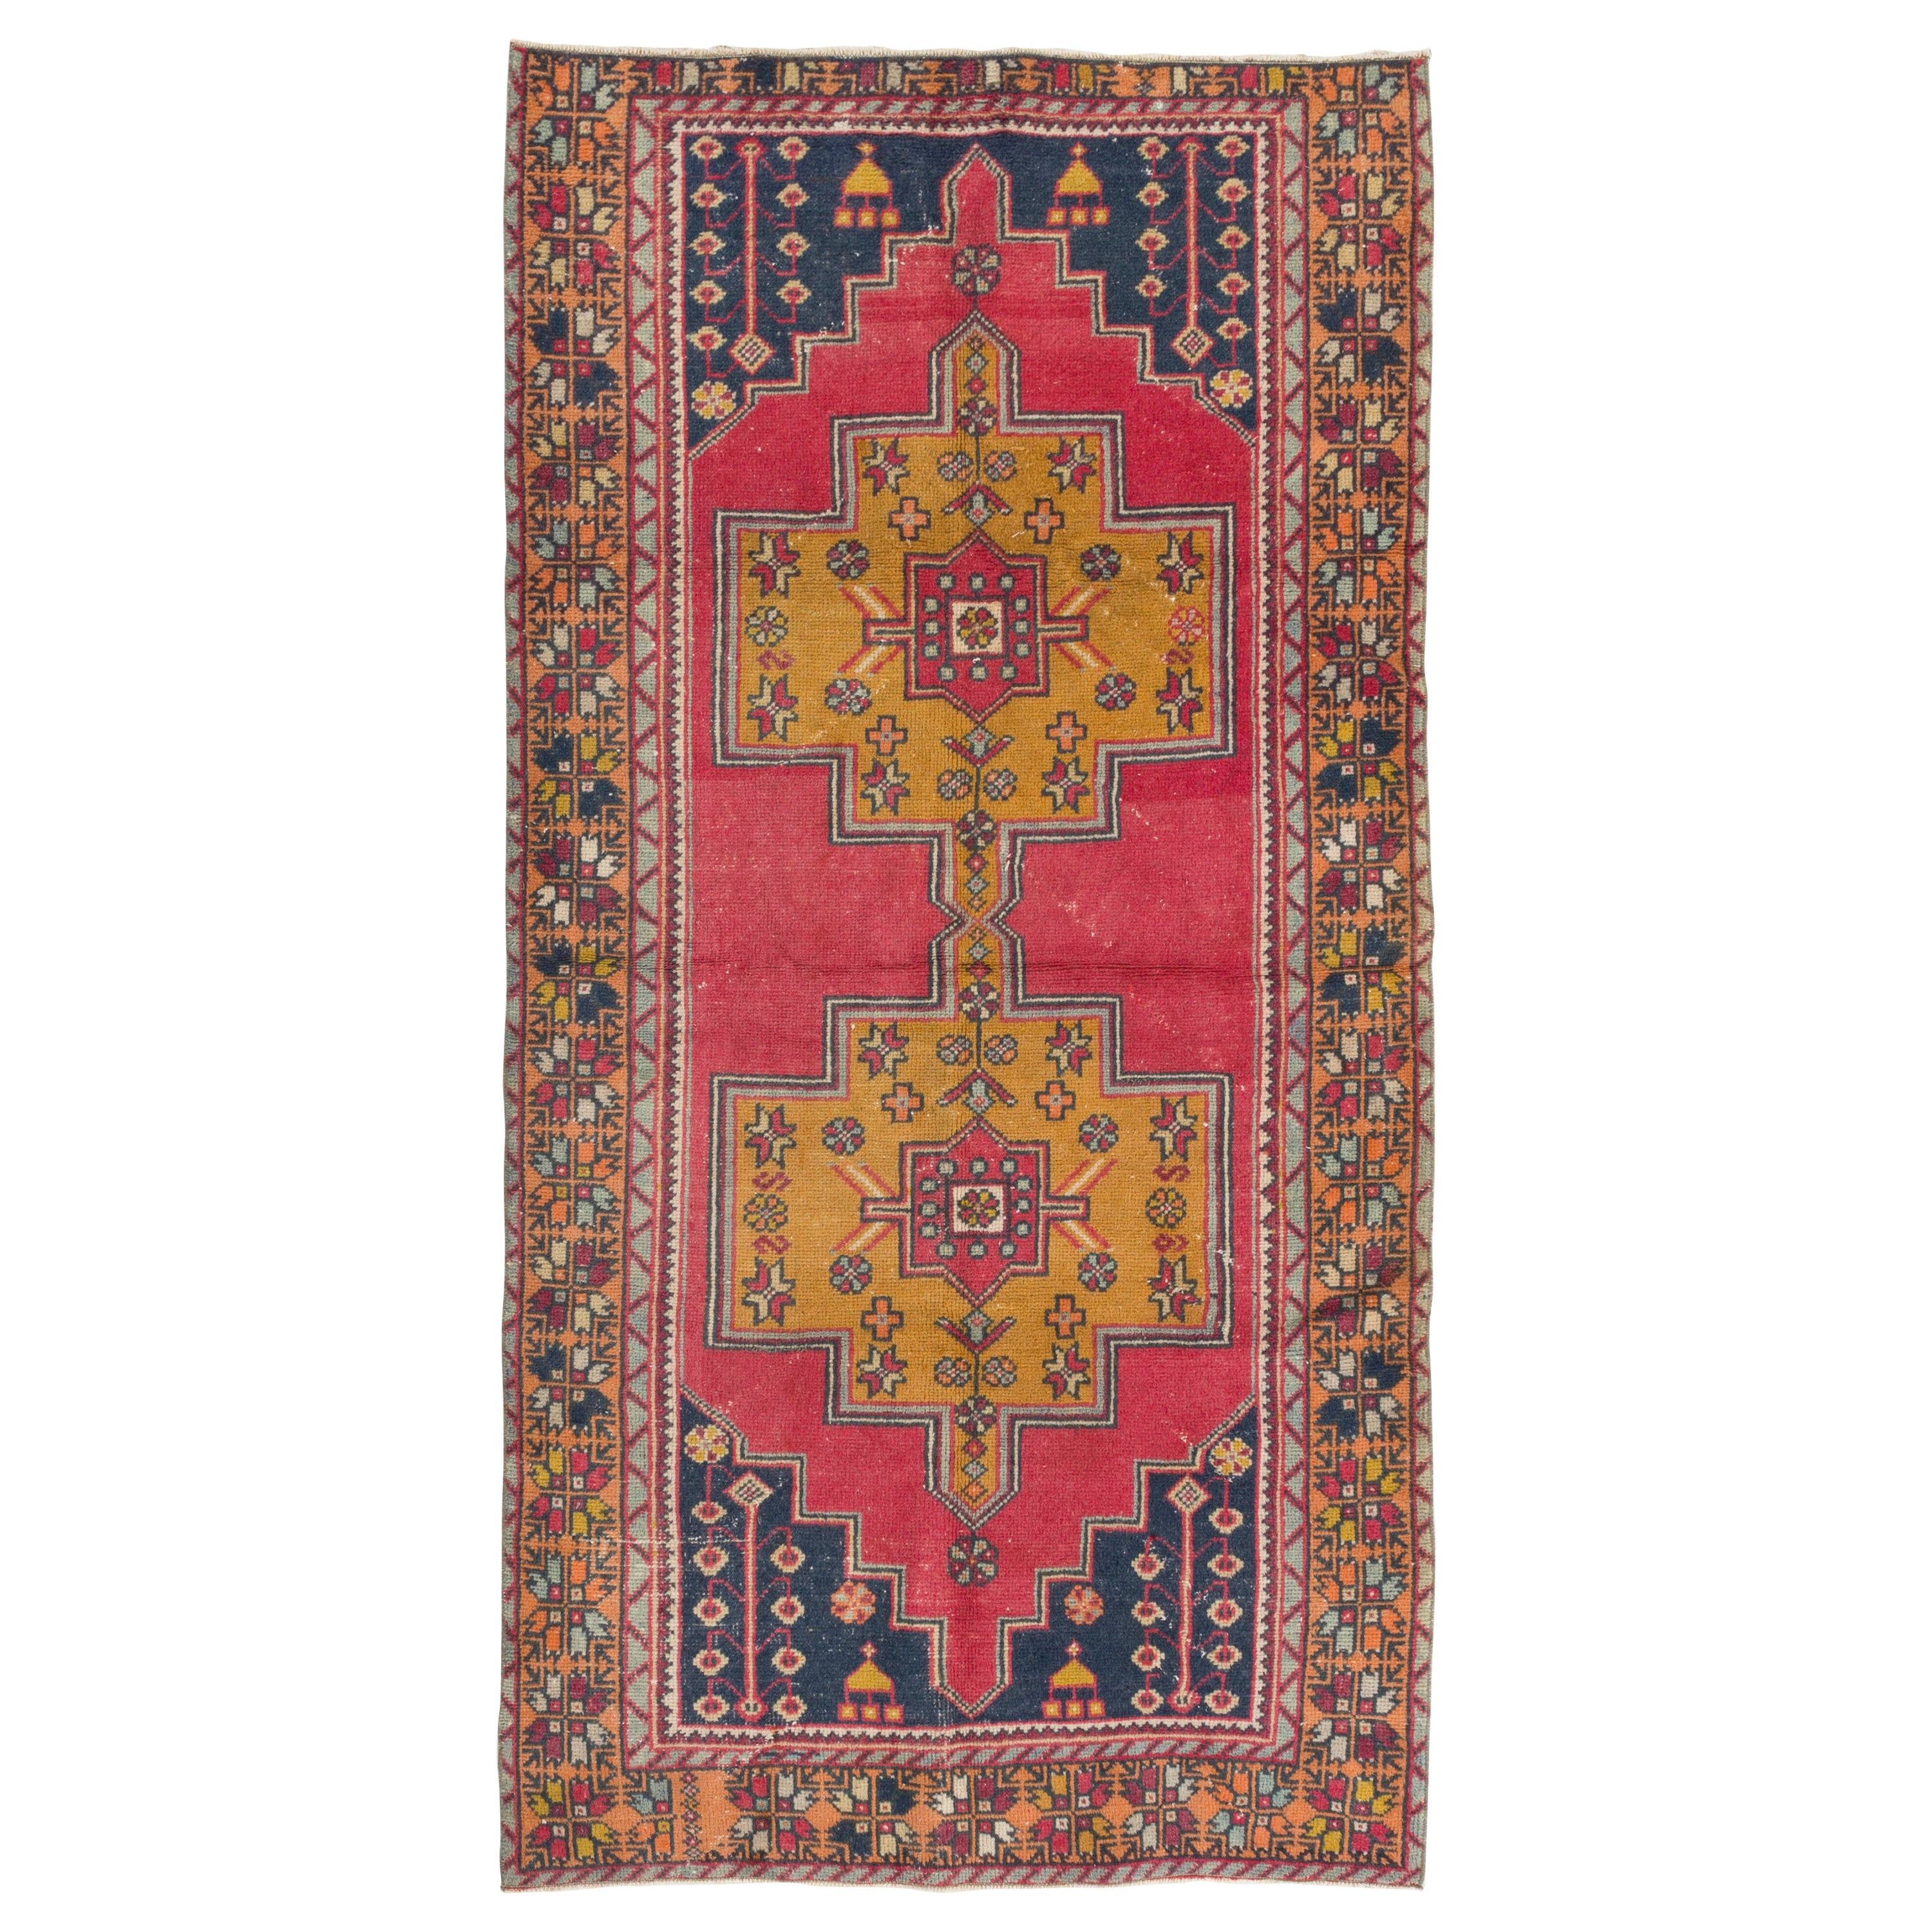 4.2x8.2 Ft Vintage Hand Knotted Turkish Wool Rug, Red, Dark Blue & Yellow Colors For Sale